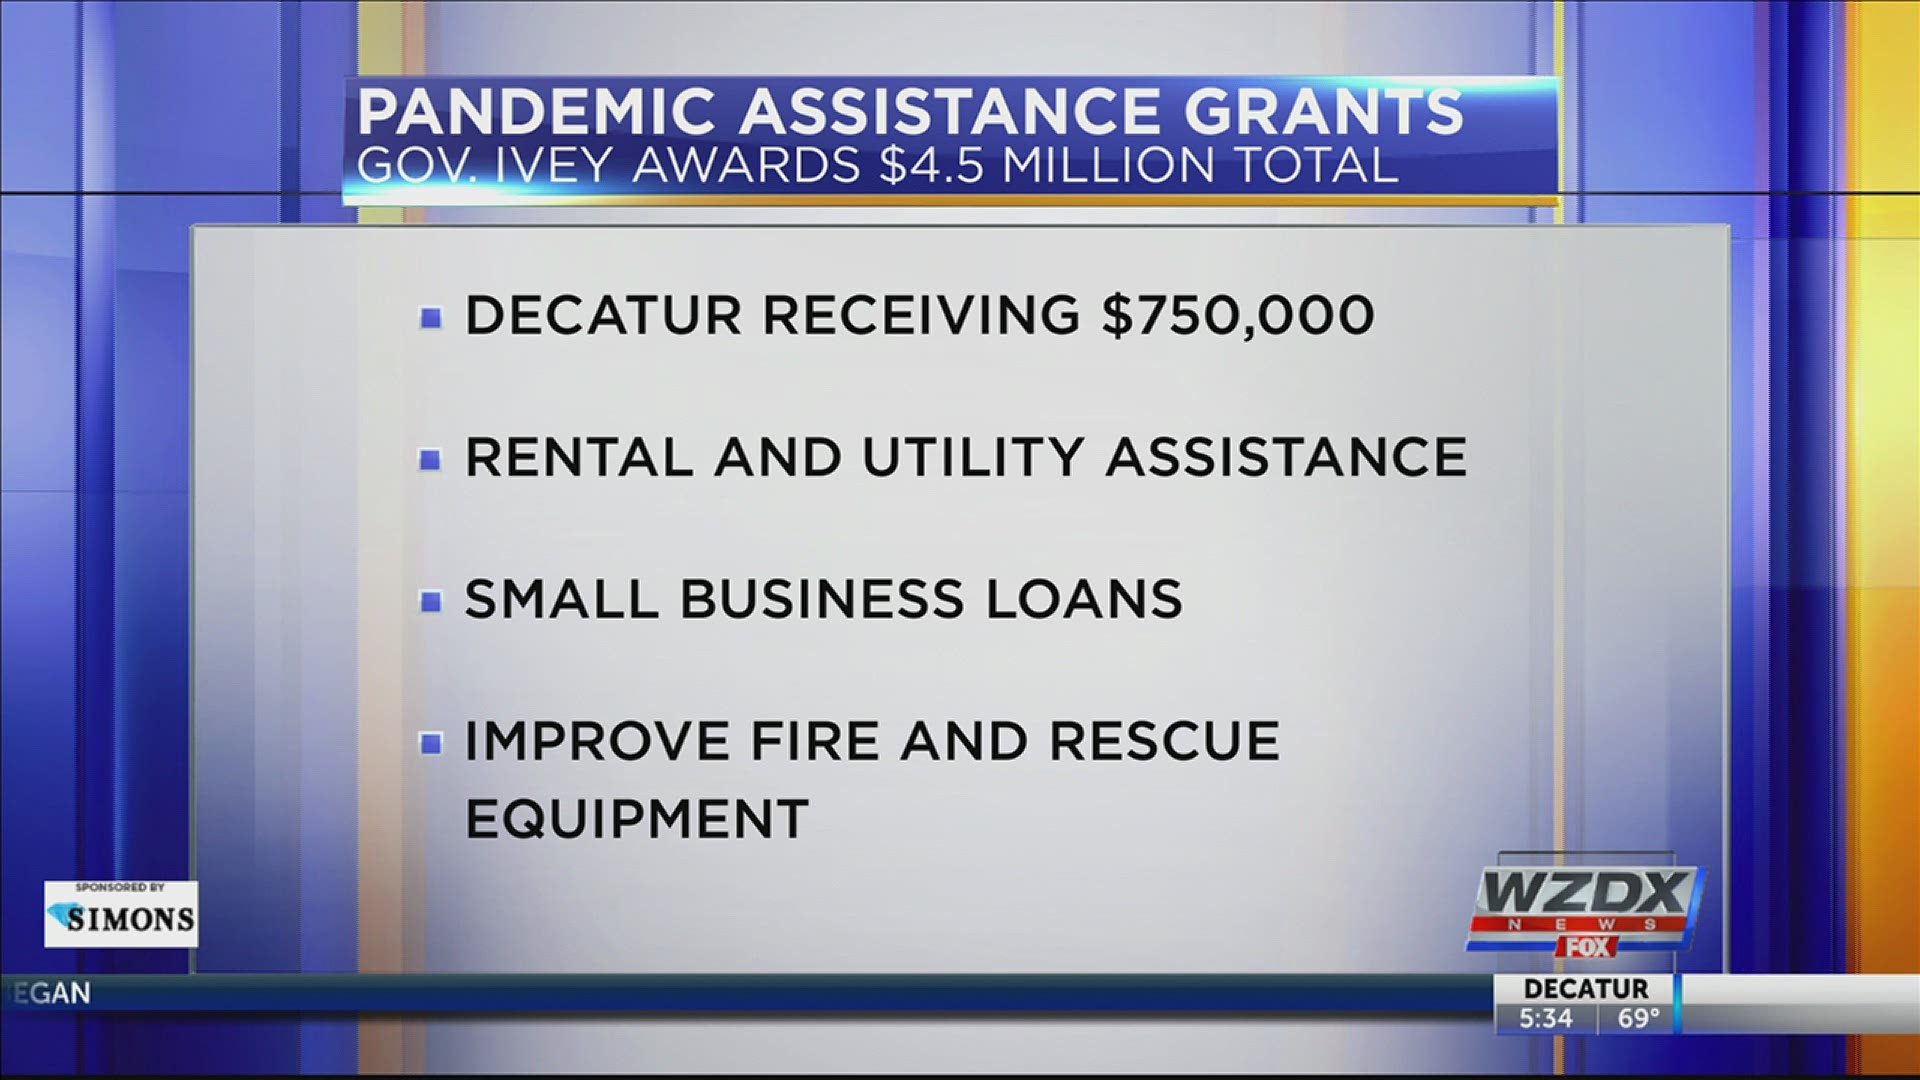 The grant funds will be spent on rental and utility assistance, small businesses with loans, and improved fire and rescue equipment.